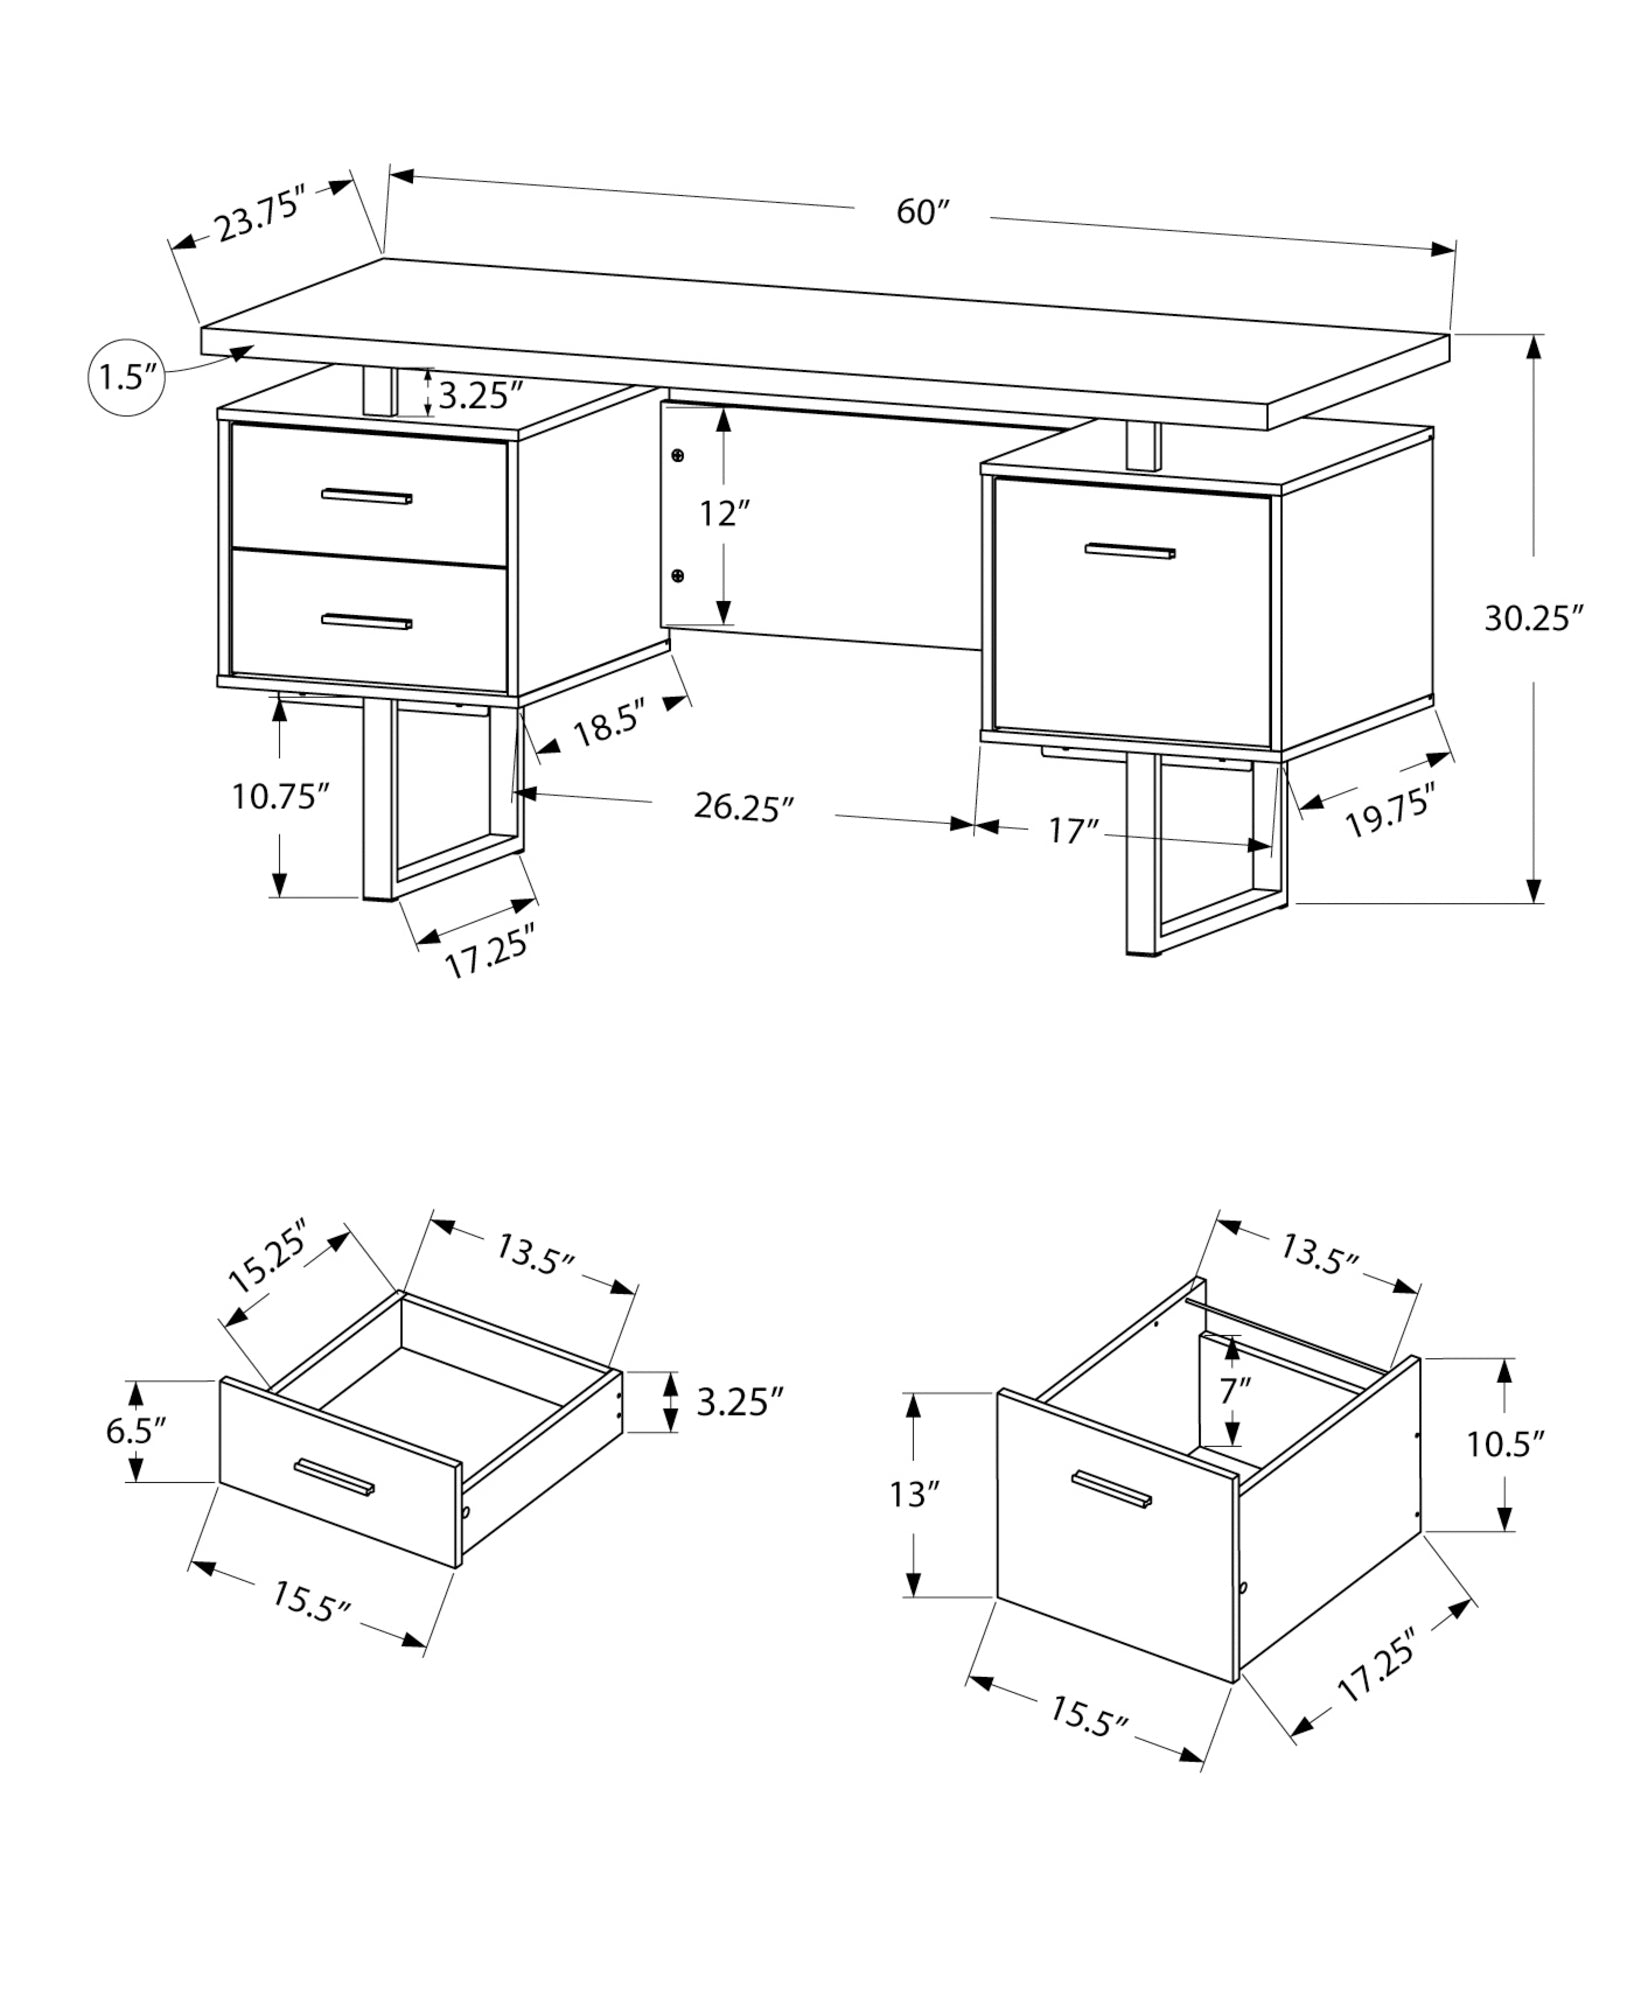 MN-377626    Computer Desk, Home Office, Laptop, Left, Right Set-Up, Storage Drawers, 60"L, Metal, Laminate, Cherry, Black, Contemporary, Modern